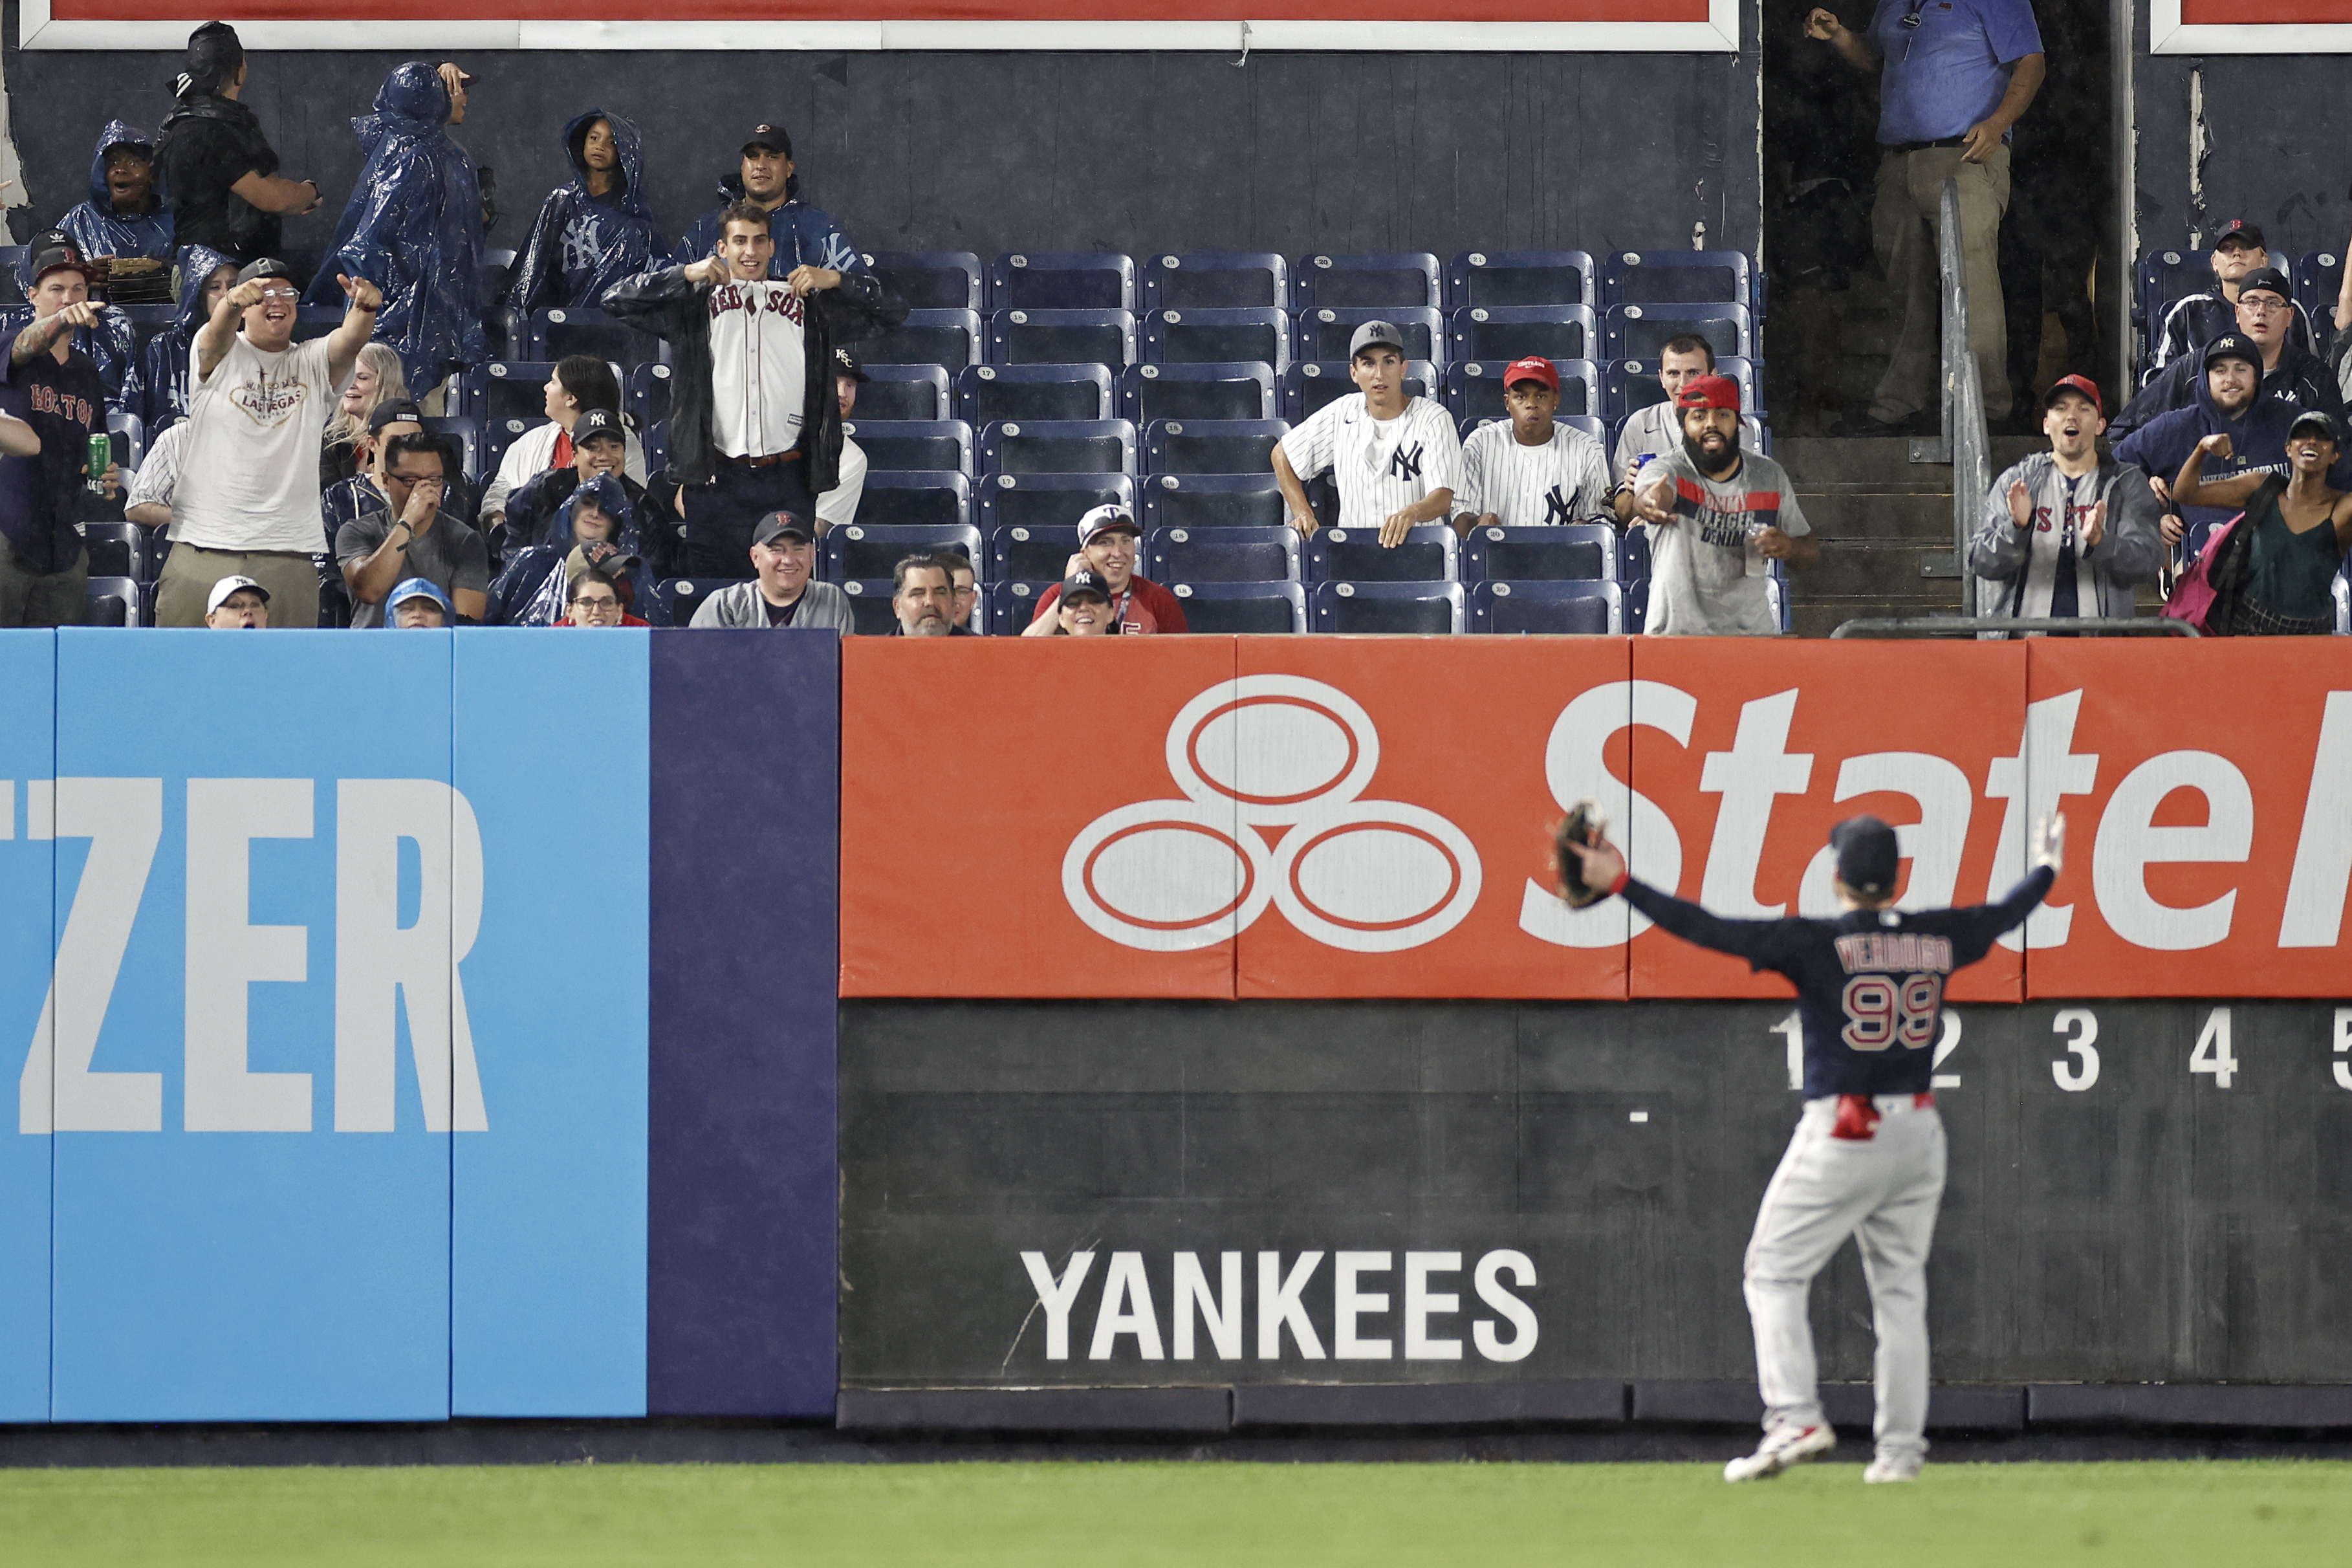 Fan who snagged baseball at Yankees game unsure what he'll do with